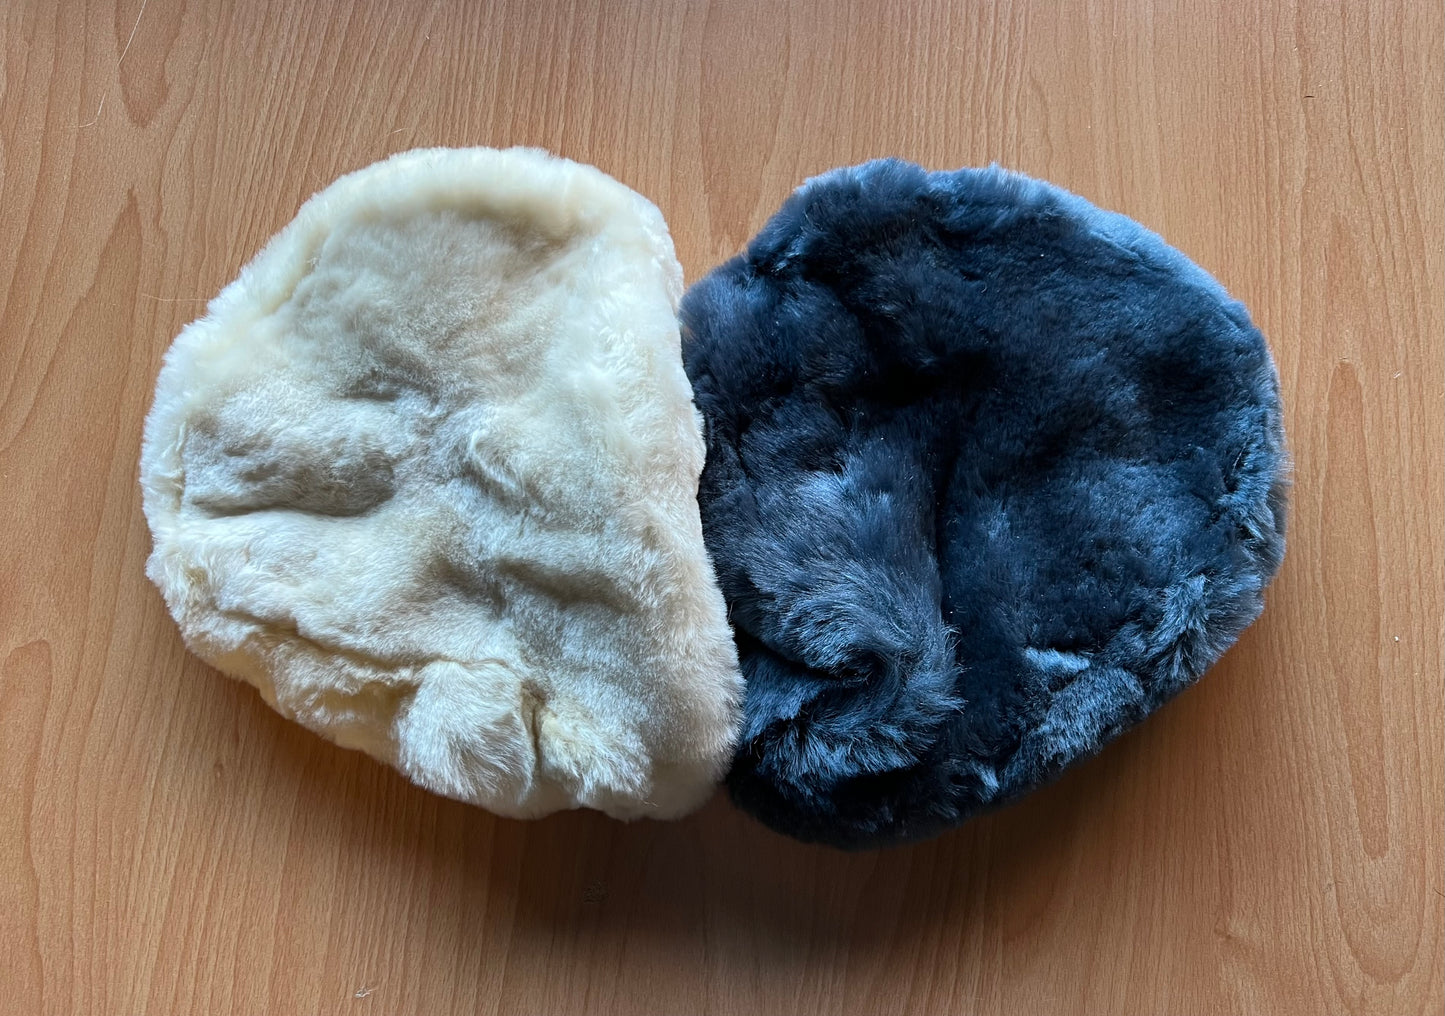 SALE Bicycle Saddle Covers Made of Sheepskin